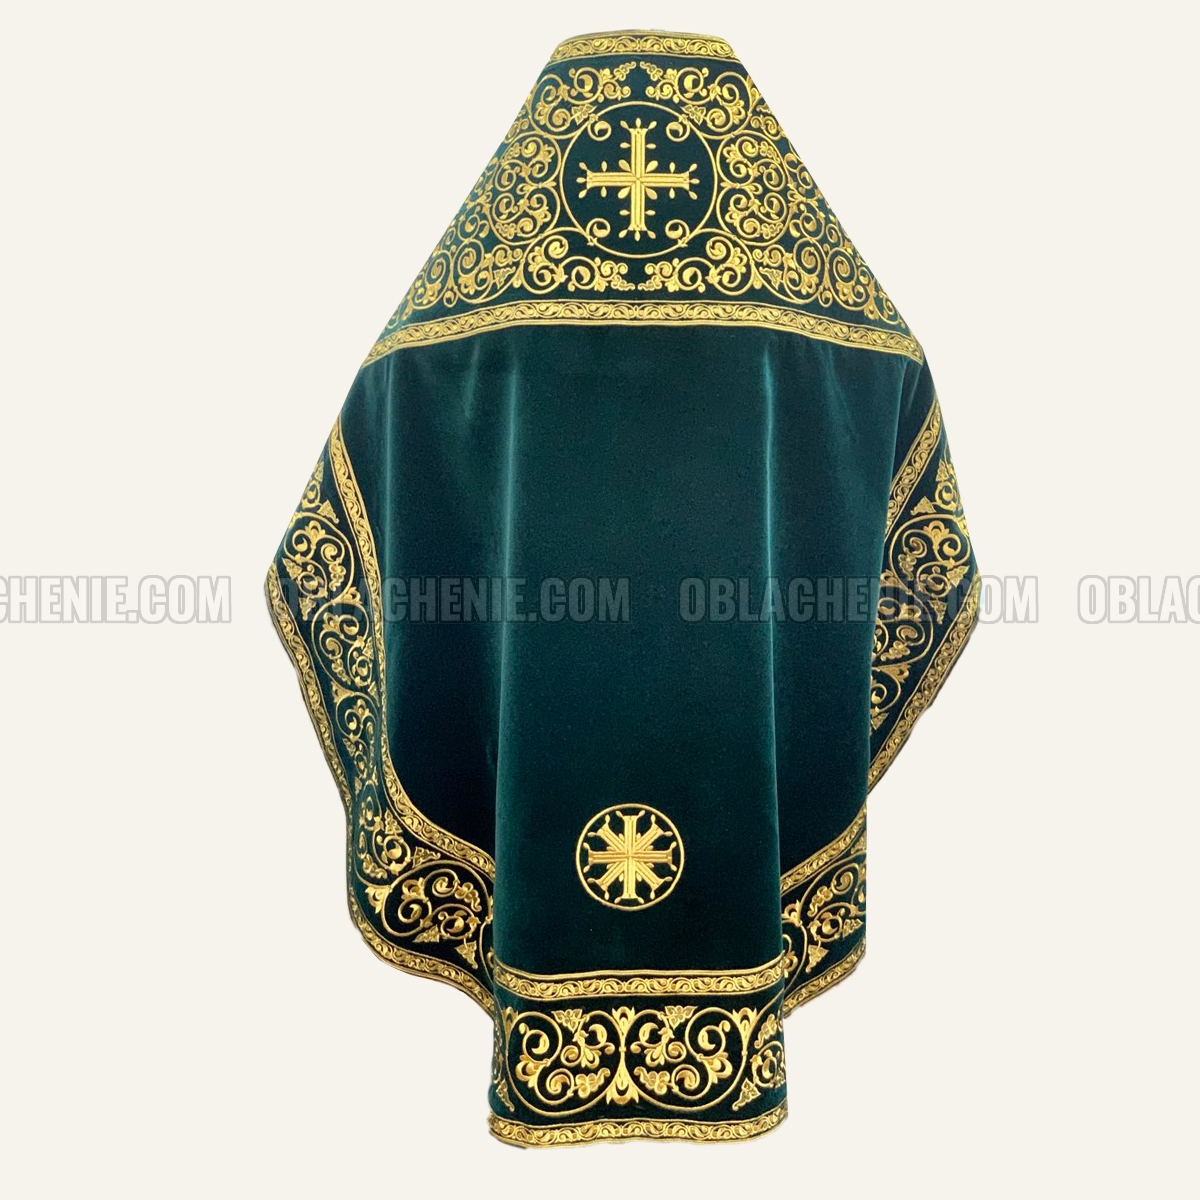 EMBROIDERED PRIEST'S VESTMENTS 10927